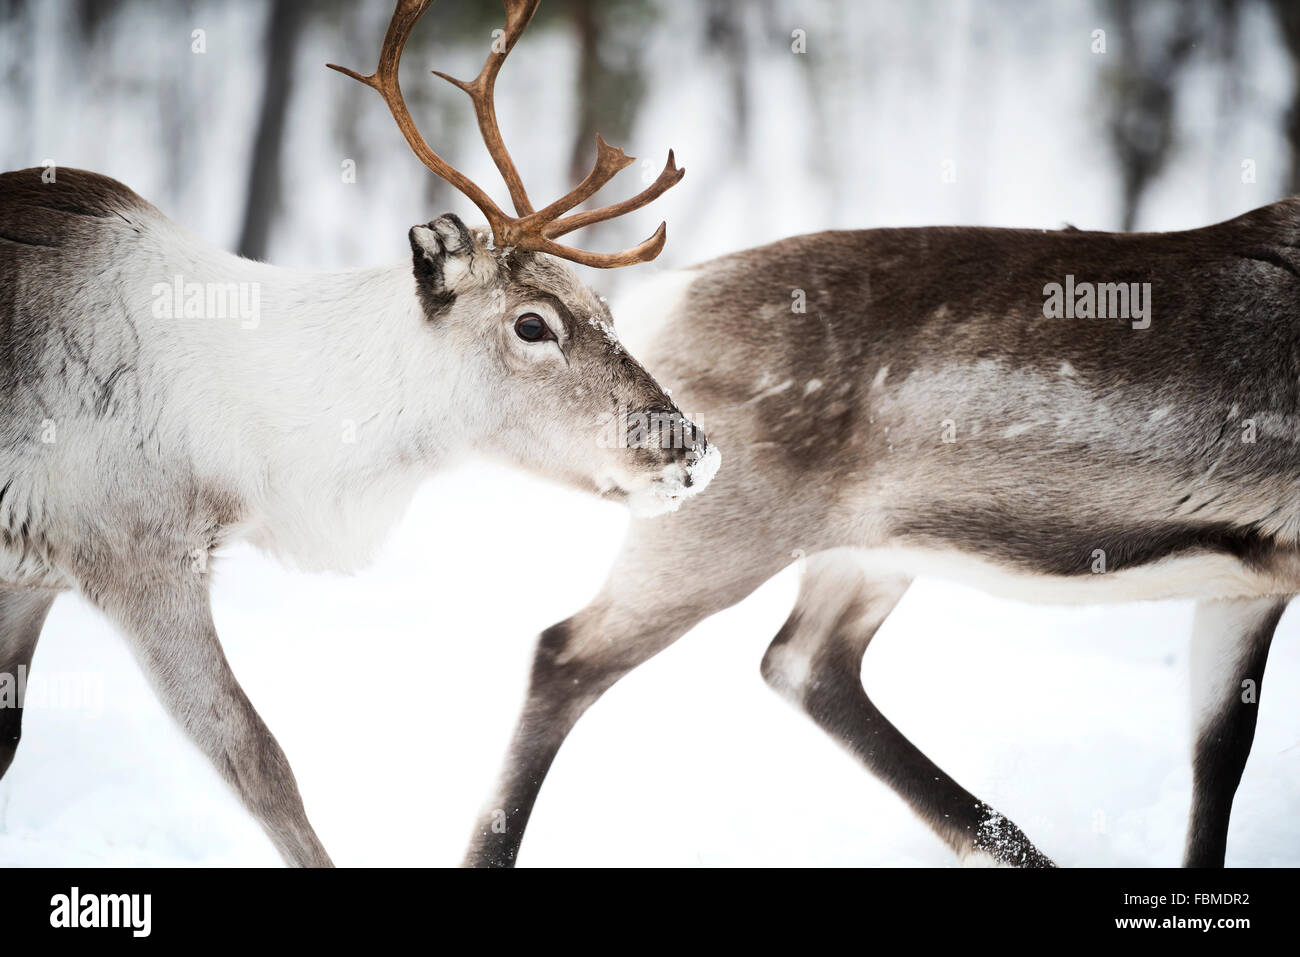 Two Reindeer, Lapland, Finland Stock Photo